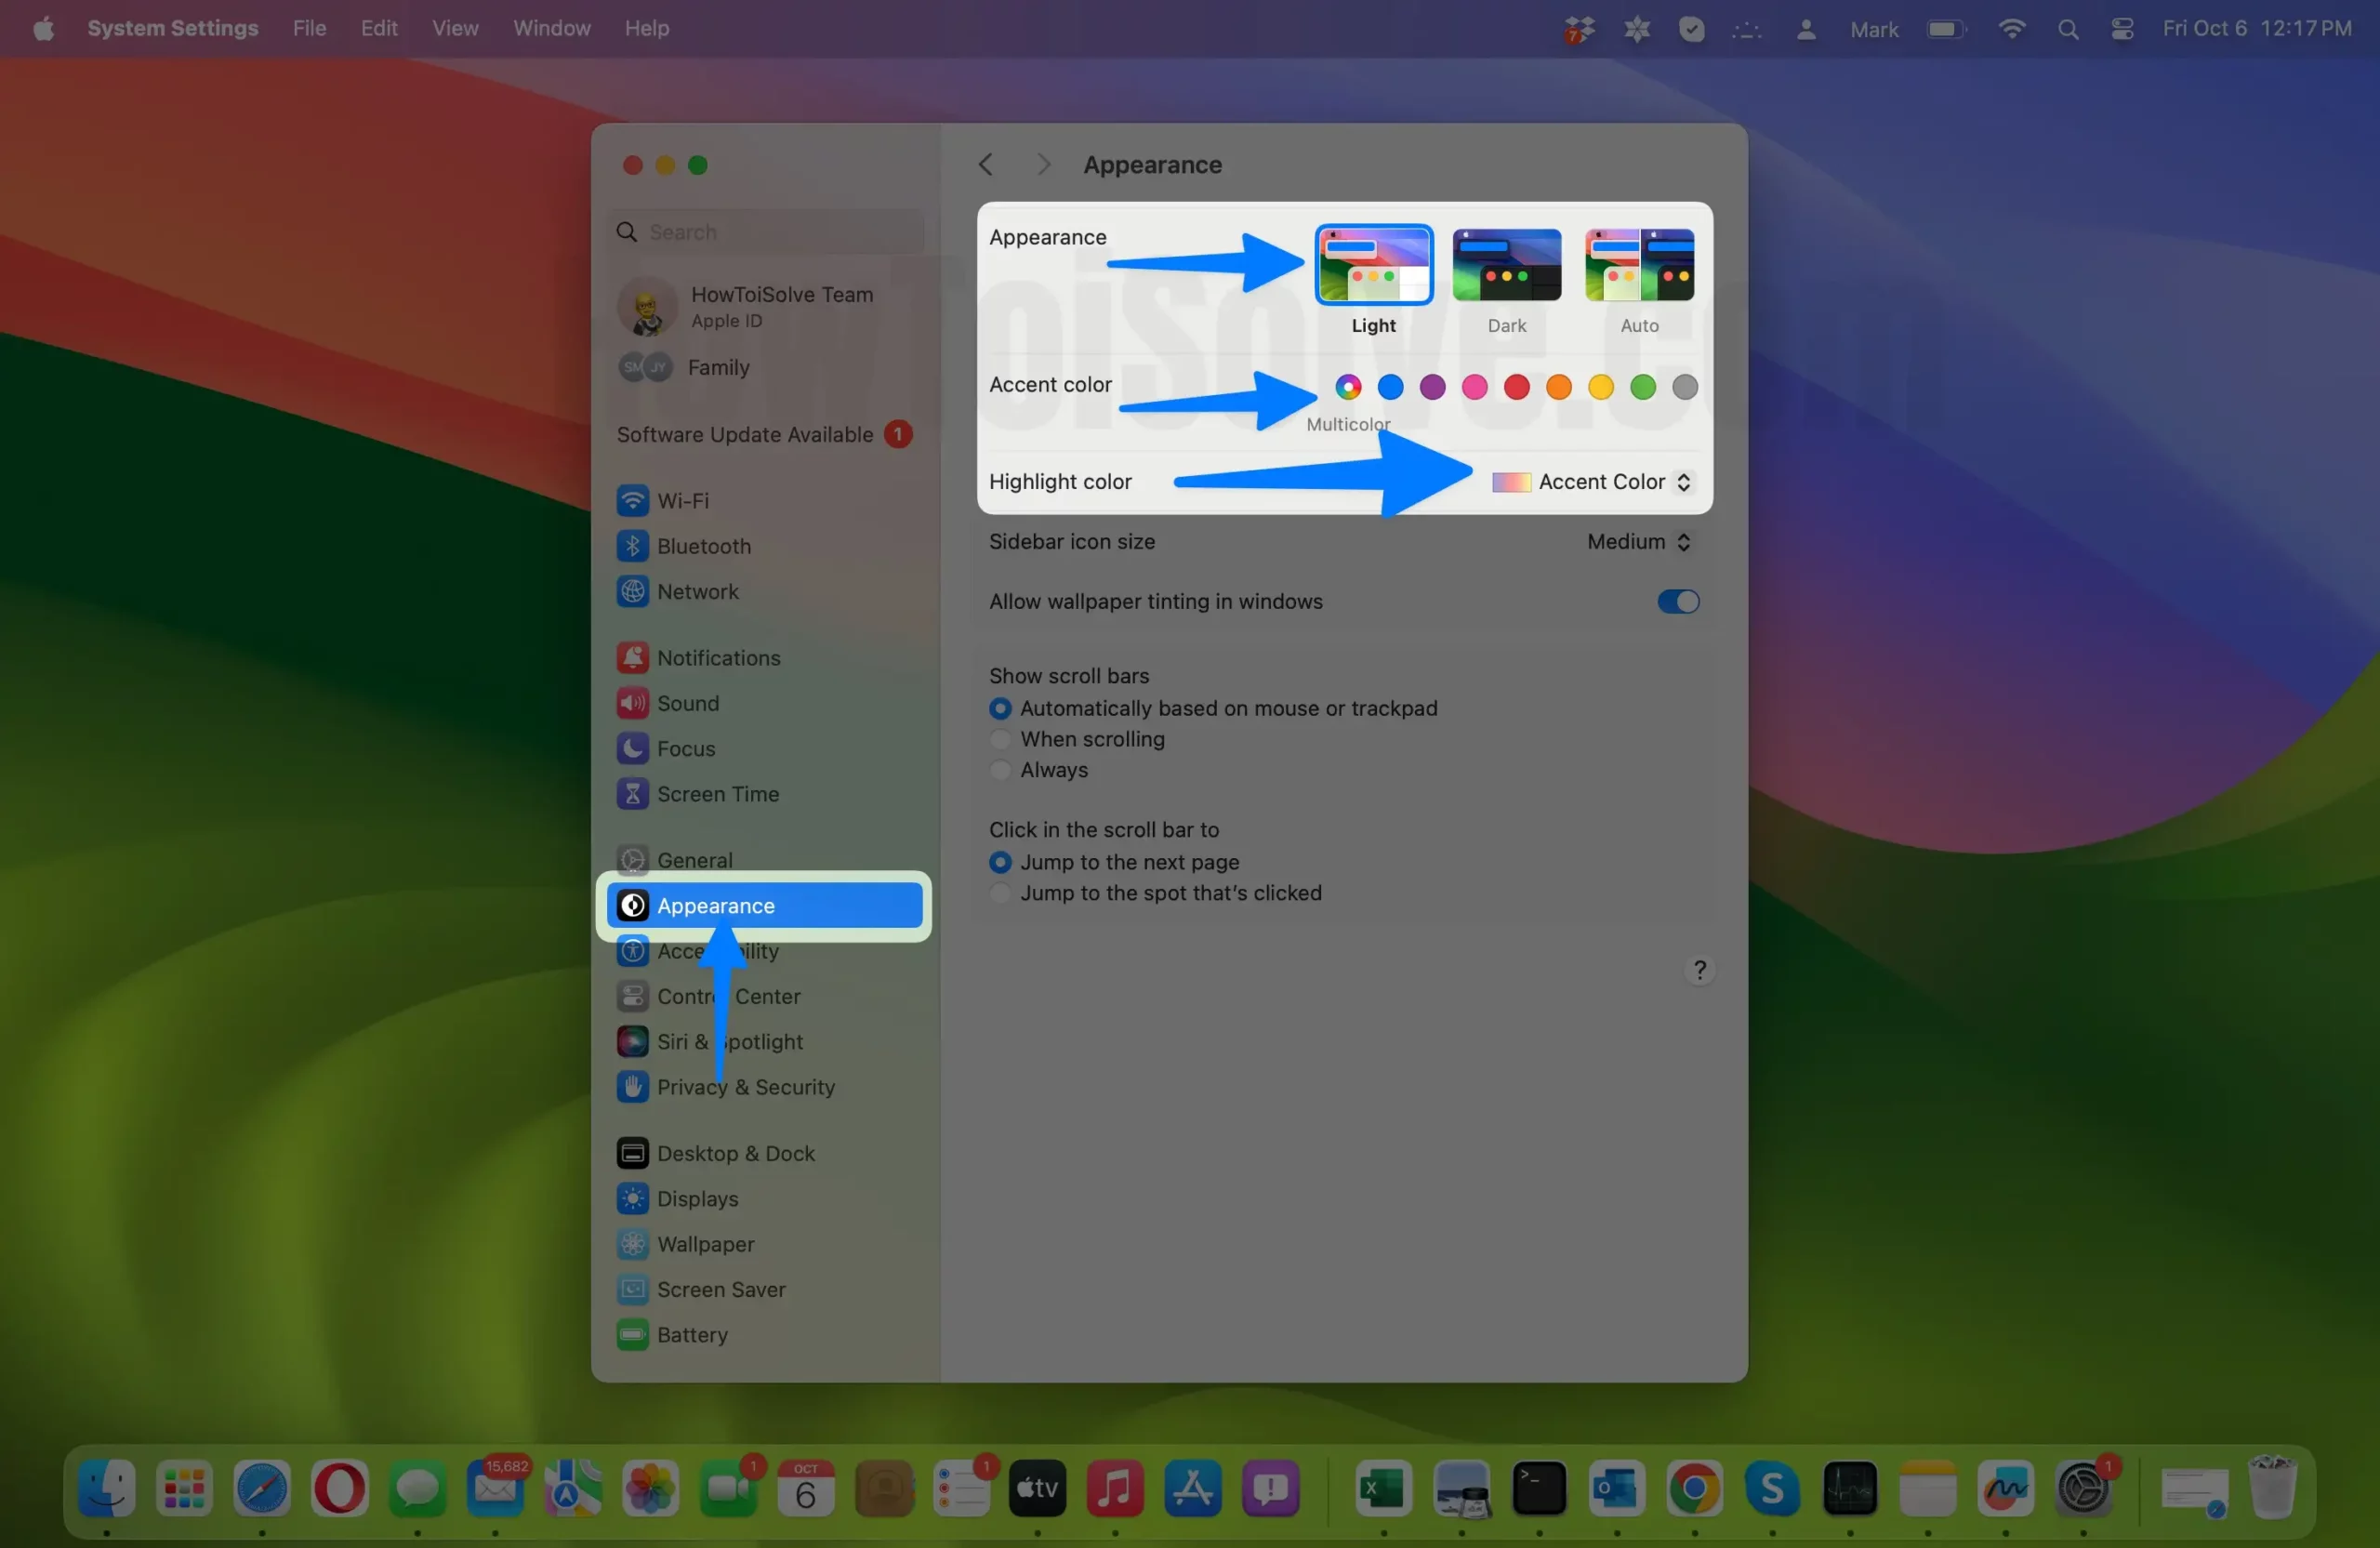 Change Accent Color and Highlight Color on Mac